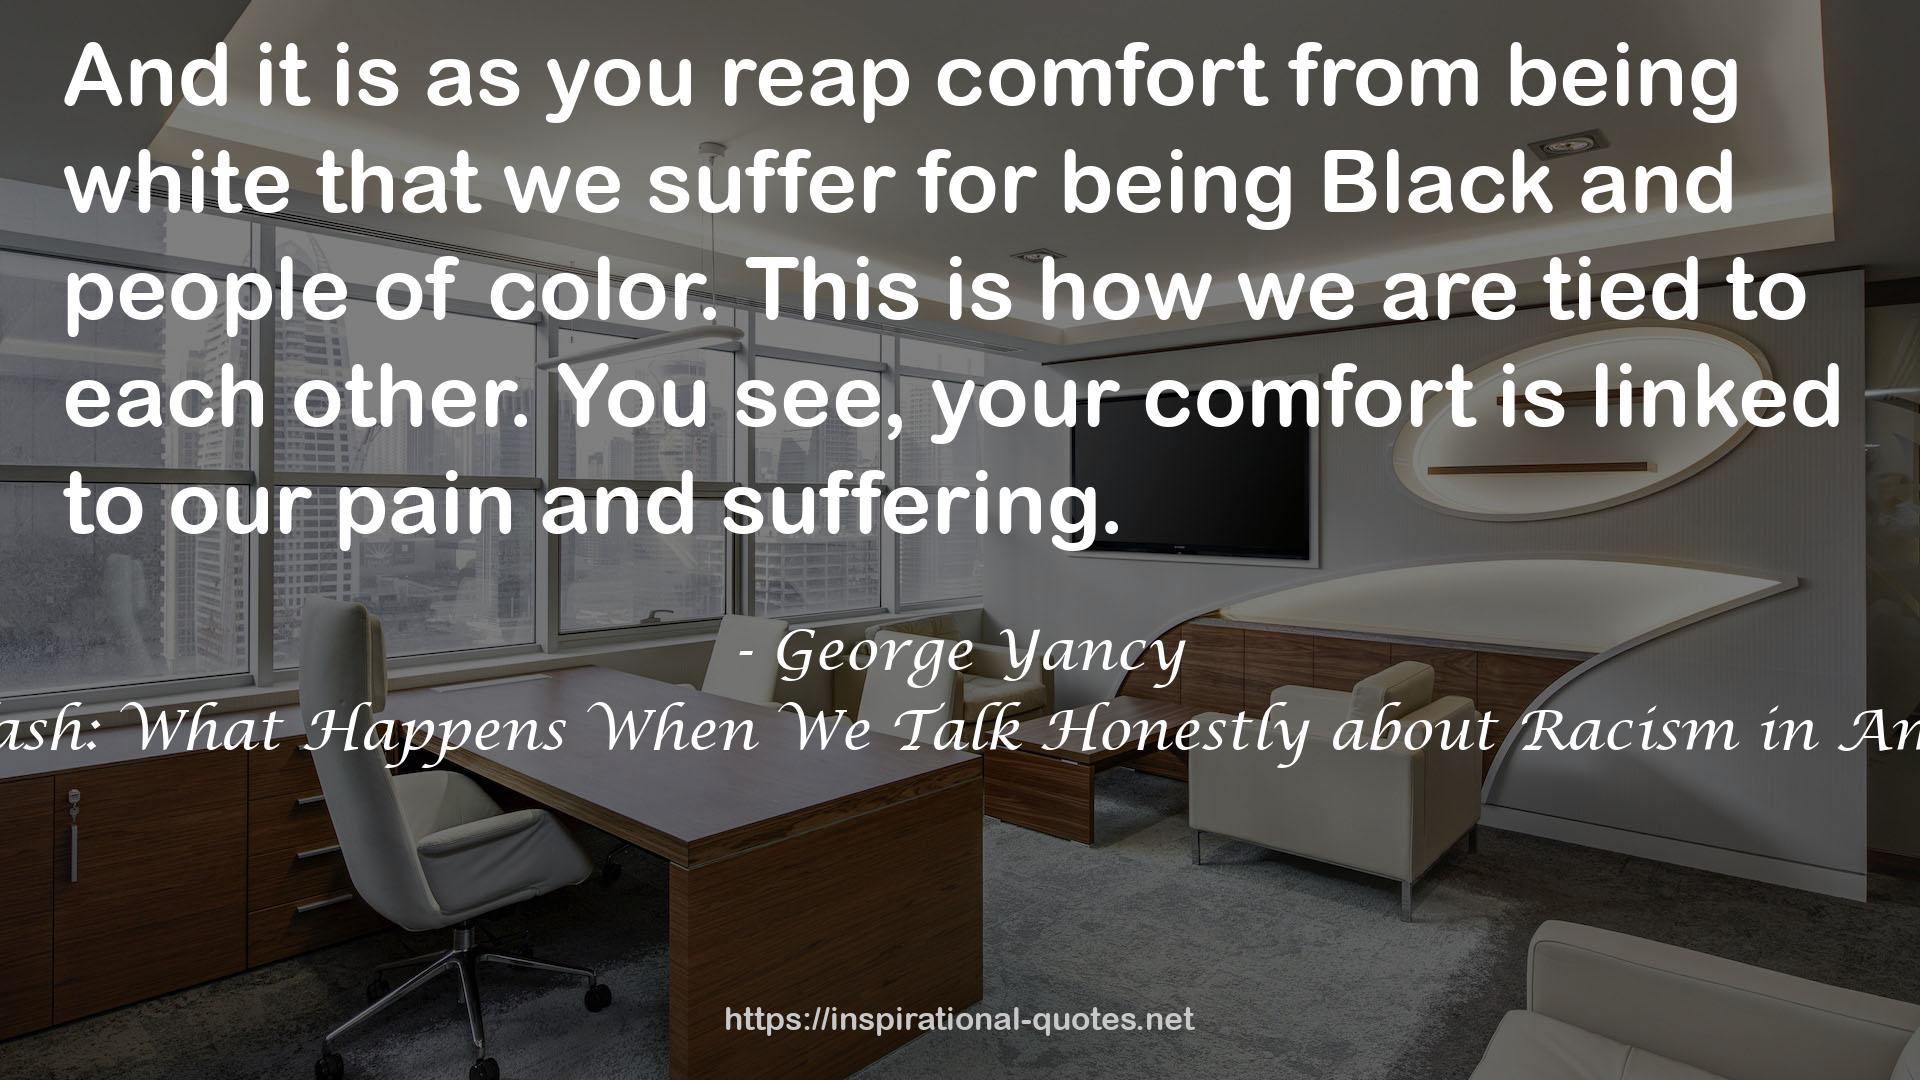 George Yancy QUOTES